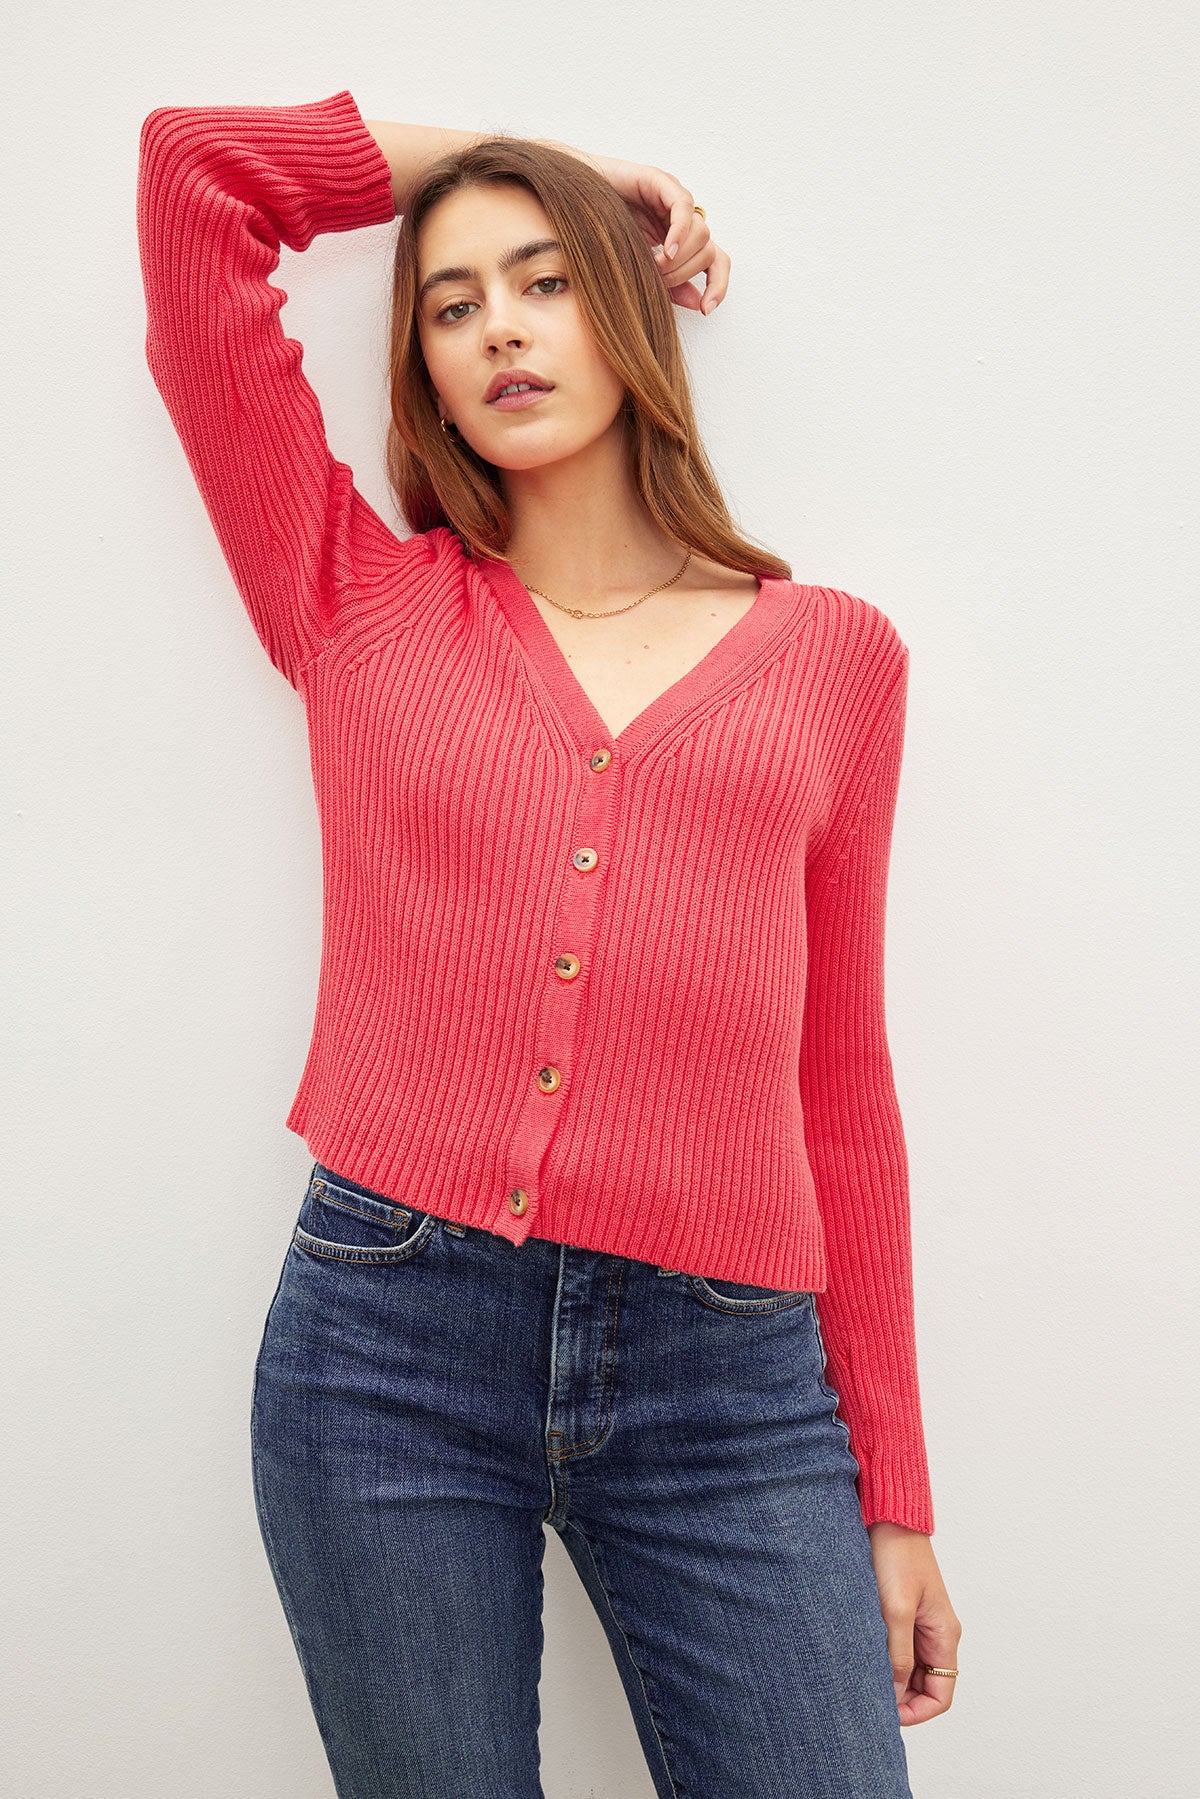 A young woman in a red HYDIE BUTTON FRONT CARDIGAN and blue jeans posing against a white background by Velvet by Graham & Spencer.-36387940499649